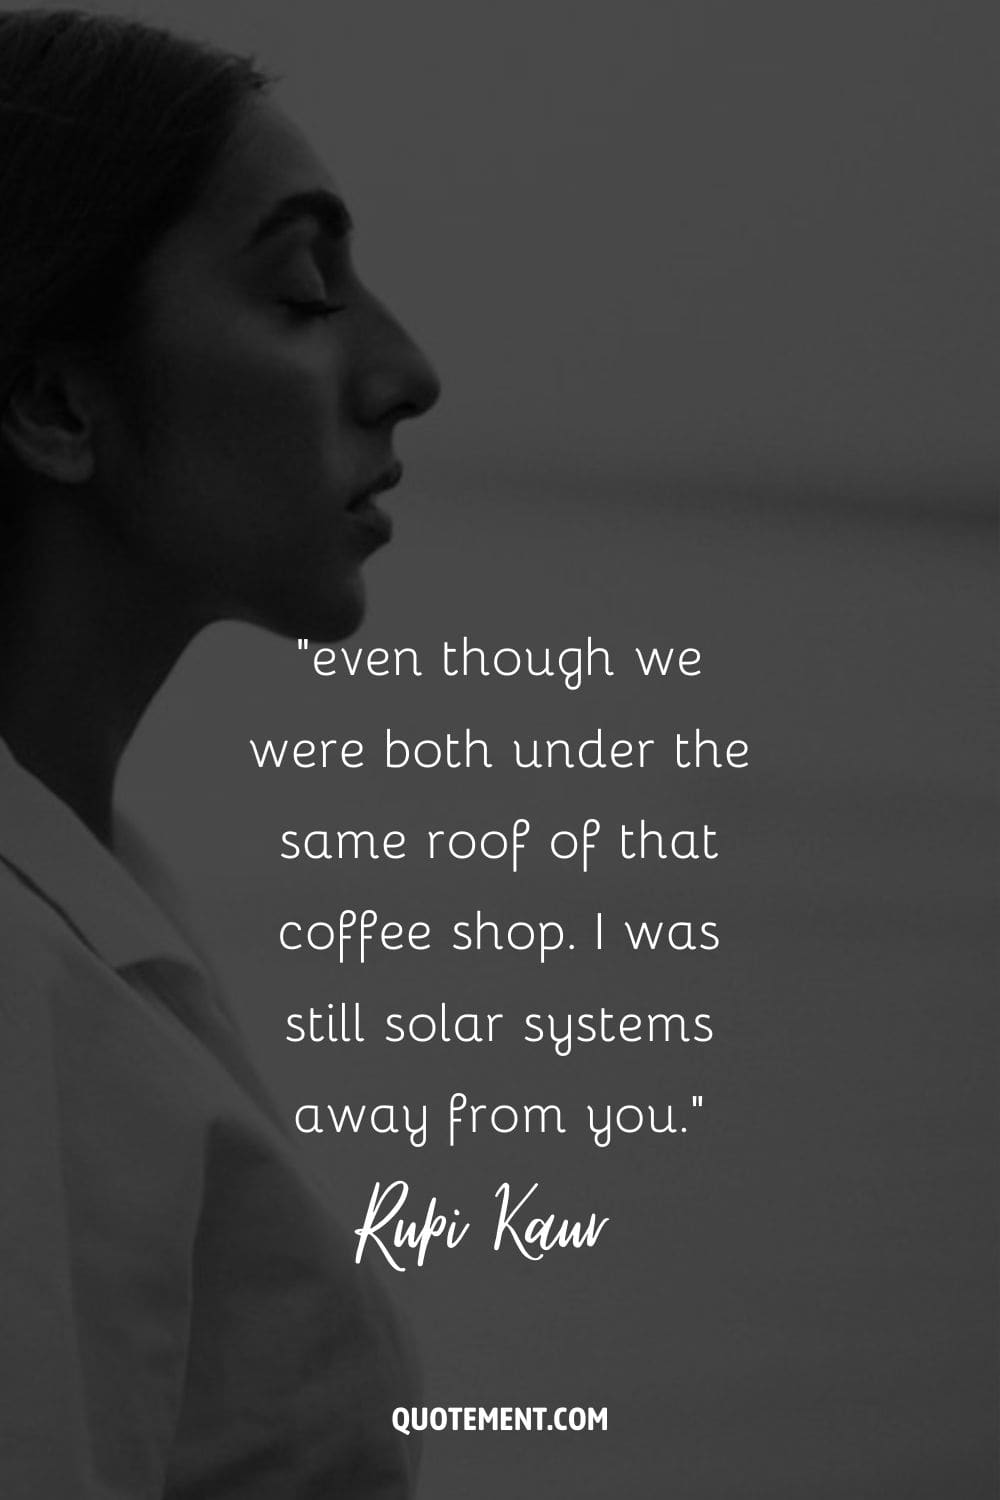 even though we were both under the same roof of that coffee shop. I was still solar systems away from you